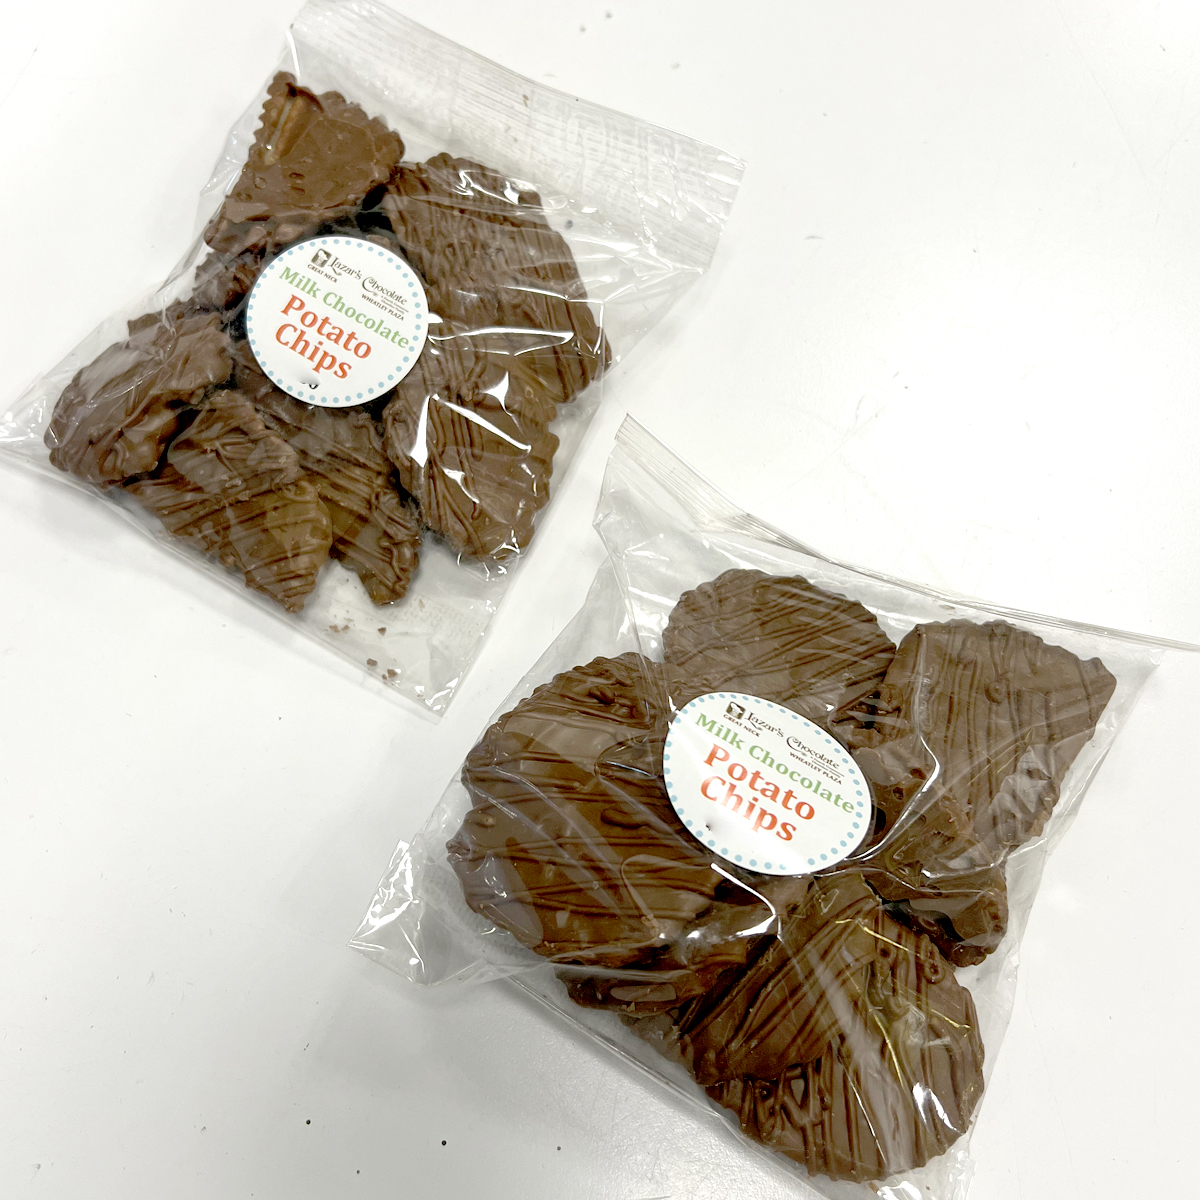 Chocolate Covered Potato Chips - Snack Pack